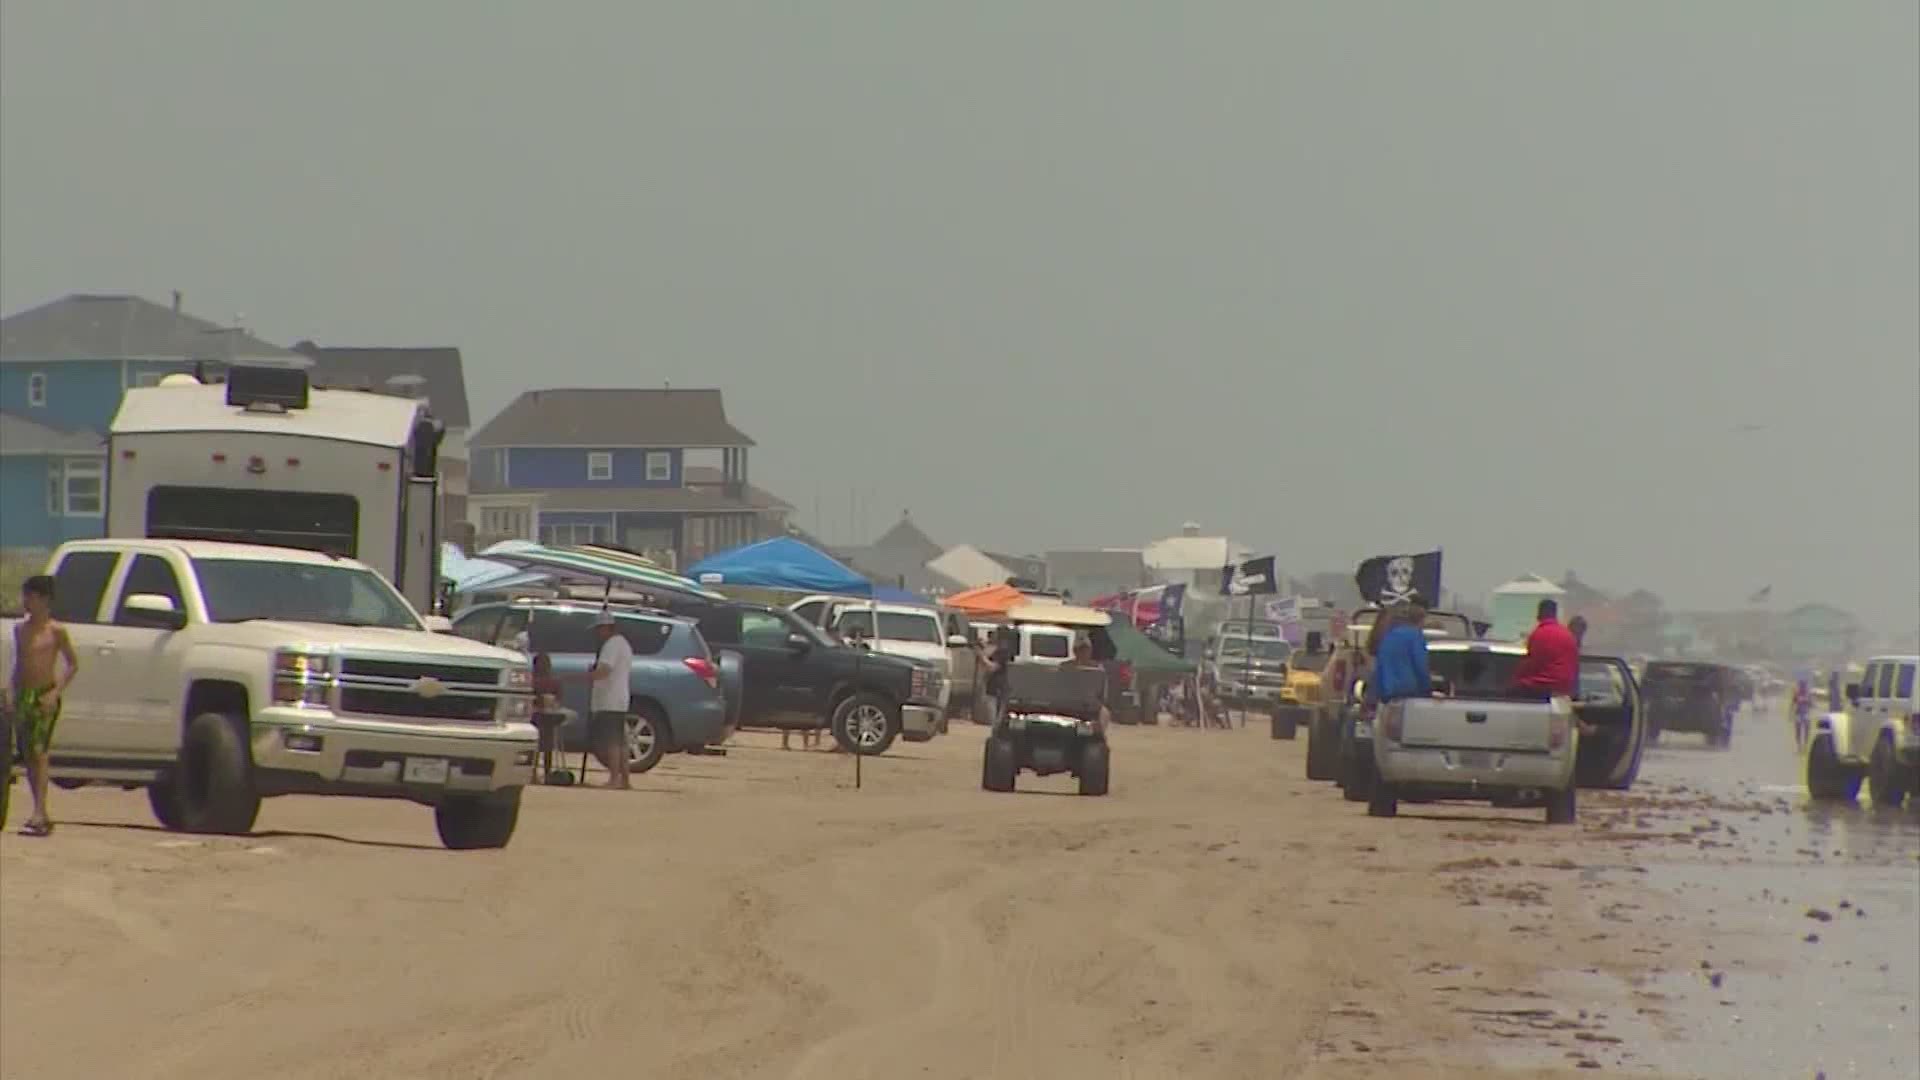 Galveston County Sheriff Henry Trochesset confirmed with KHOU 11 that 87 arrests were made as of 7 a.m. Saturday during the first night of Jeep Weekend.